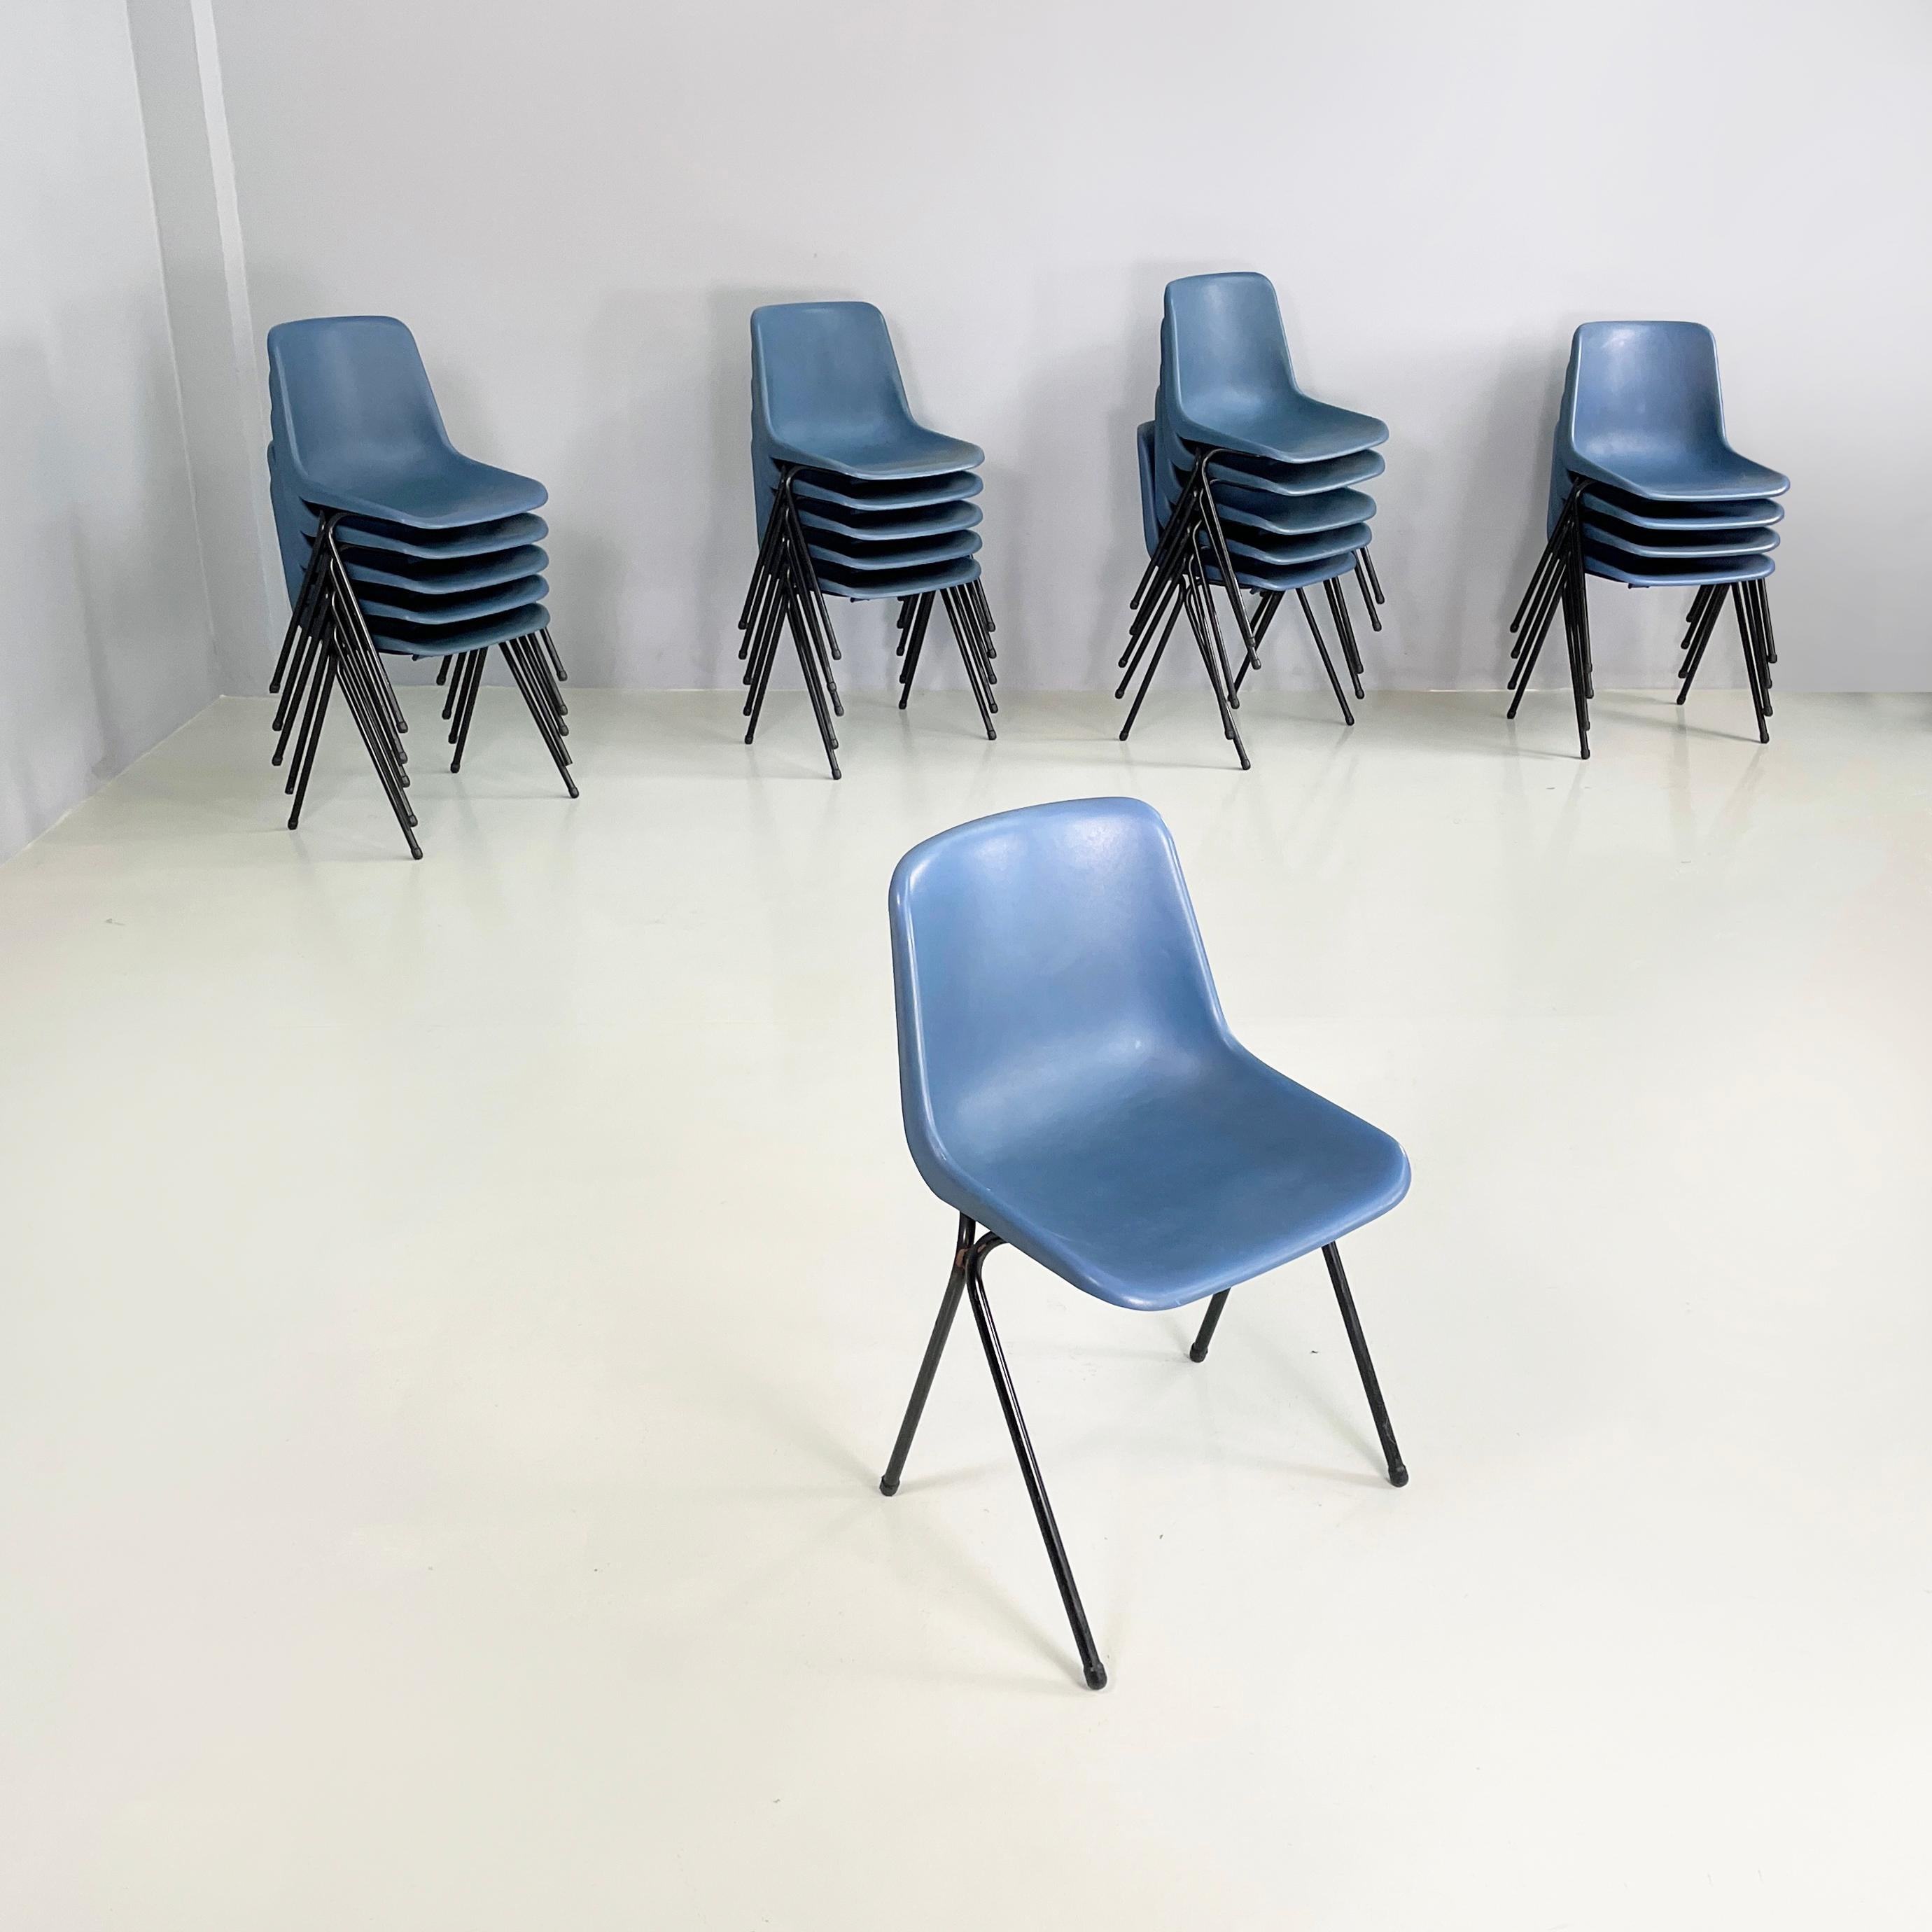 Italian modern Stackable chairs in blue plastic and black metal, 2000s
Set of 20 chairs with curved monocoque in blue plastic. The legs are made of black painted metal rod. Stackable.
2000s. Under the seat there are a logo and a label.
Vintage